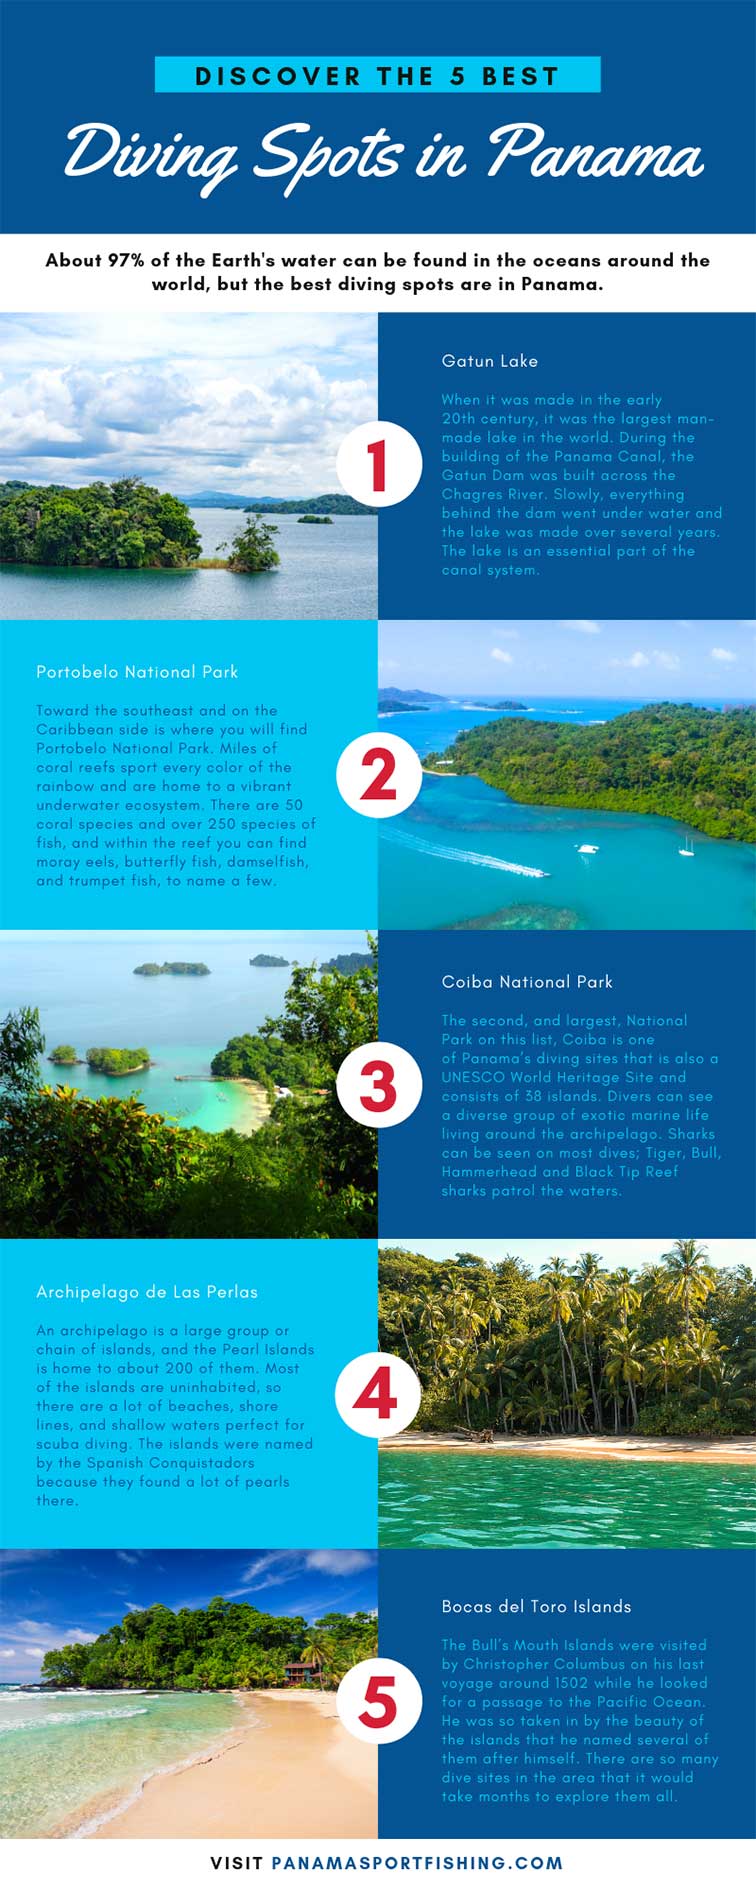 Discover the 5 Best Diving Spots in Panama infographic